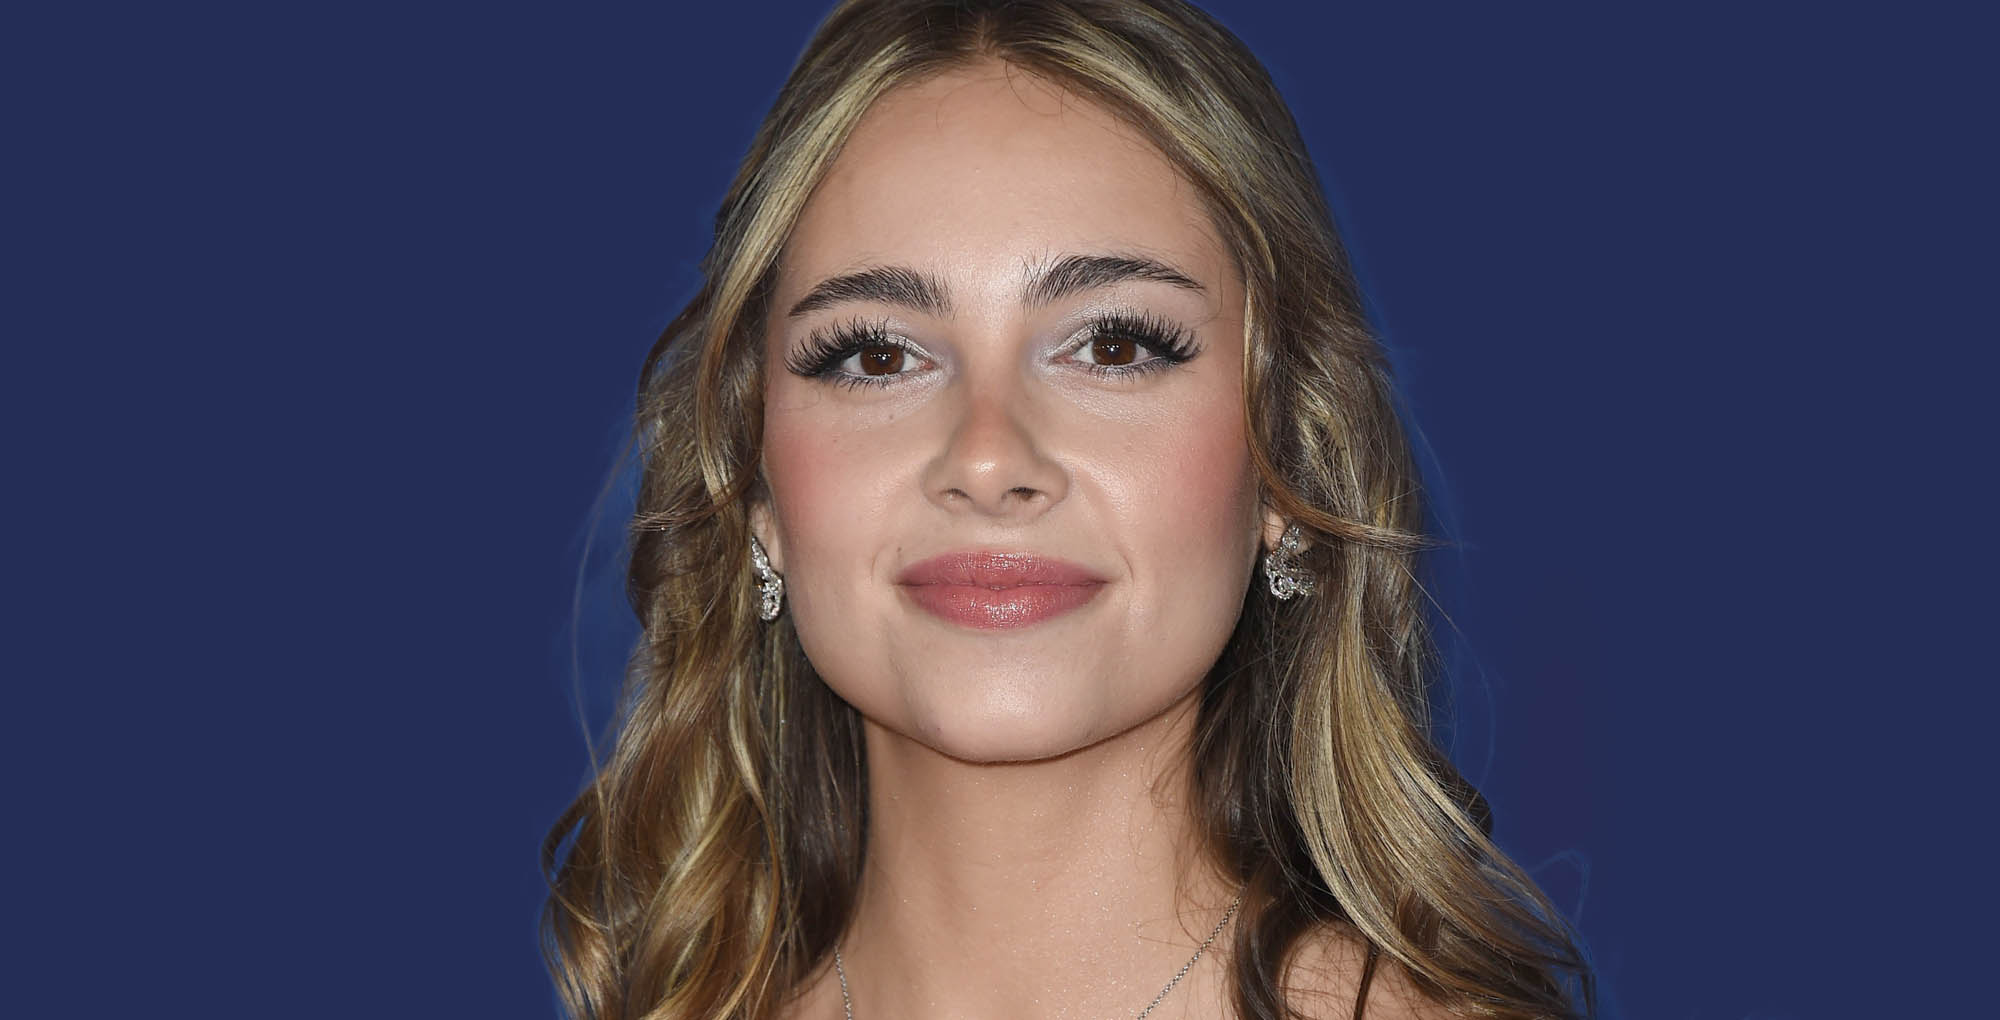 general hospital actress haley pullos pleads not guilty.